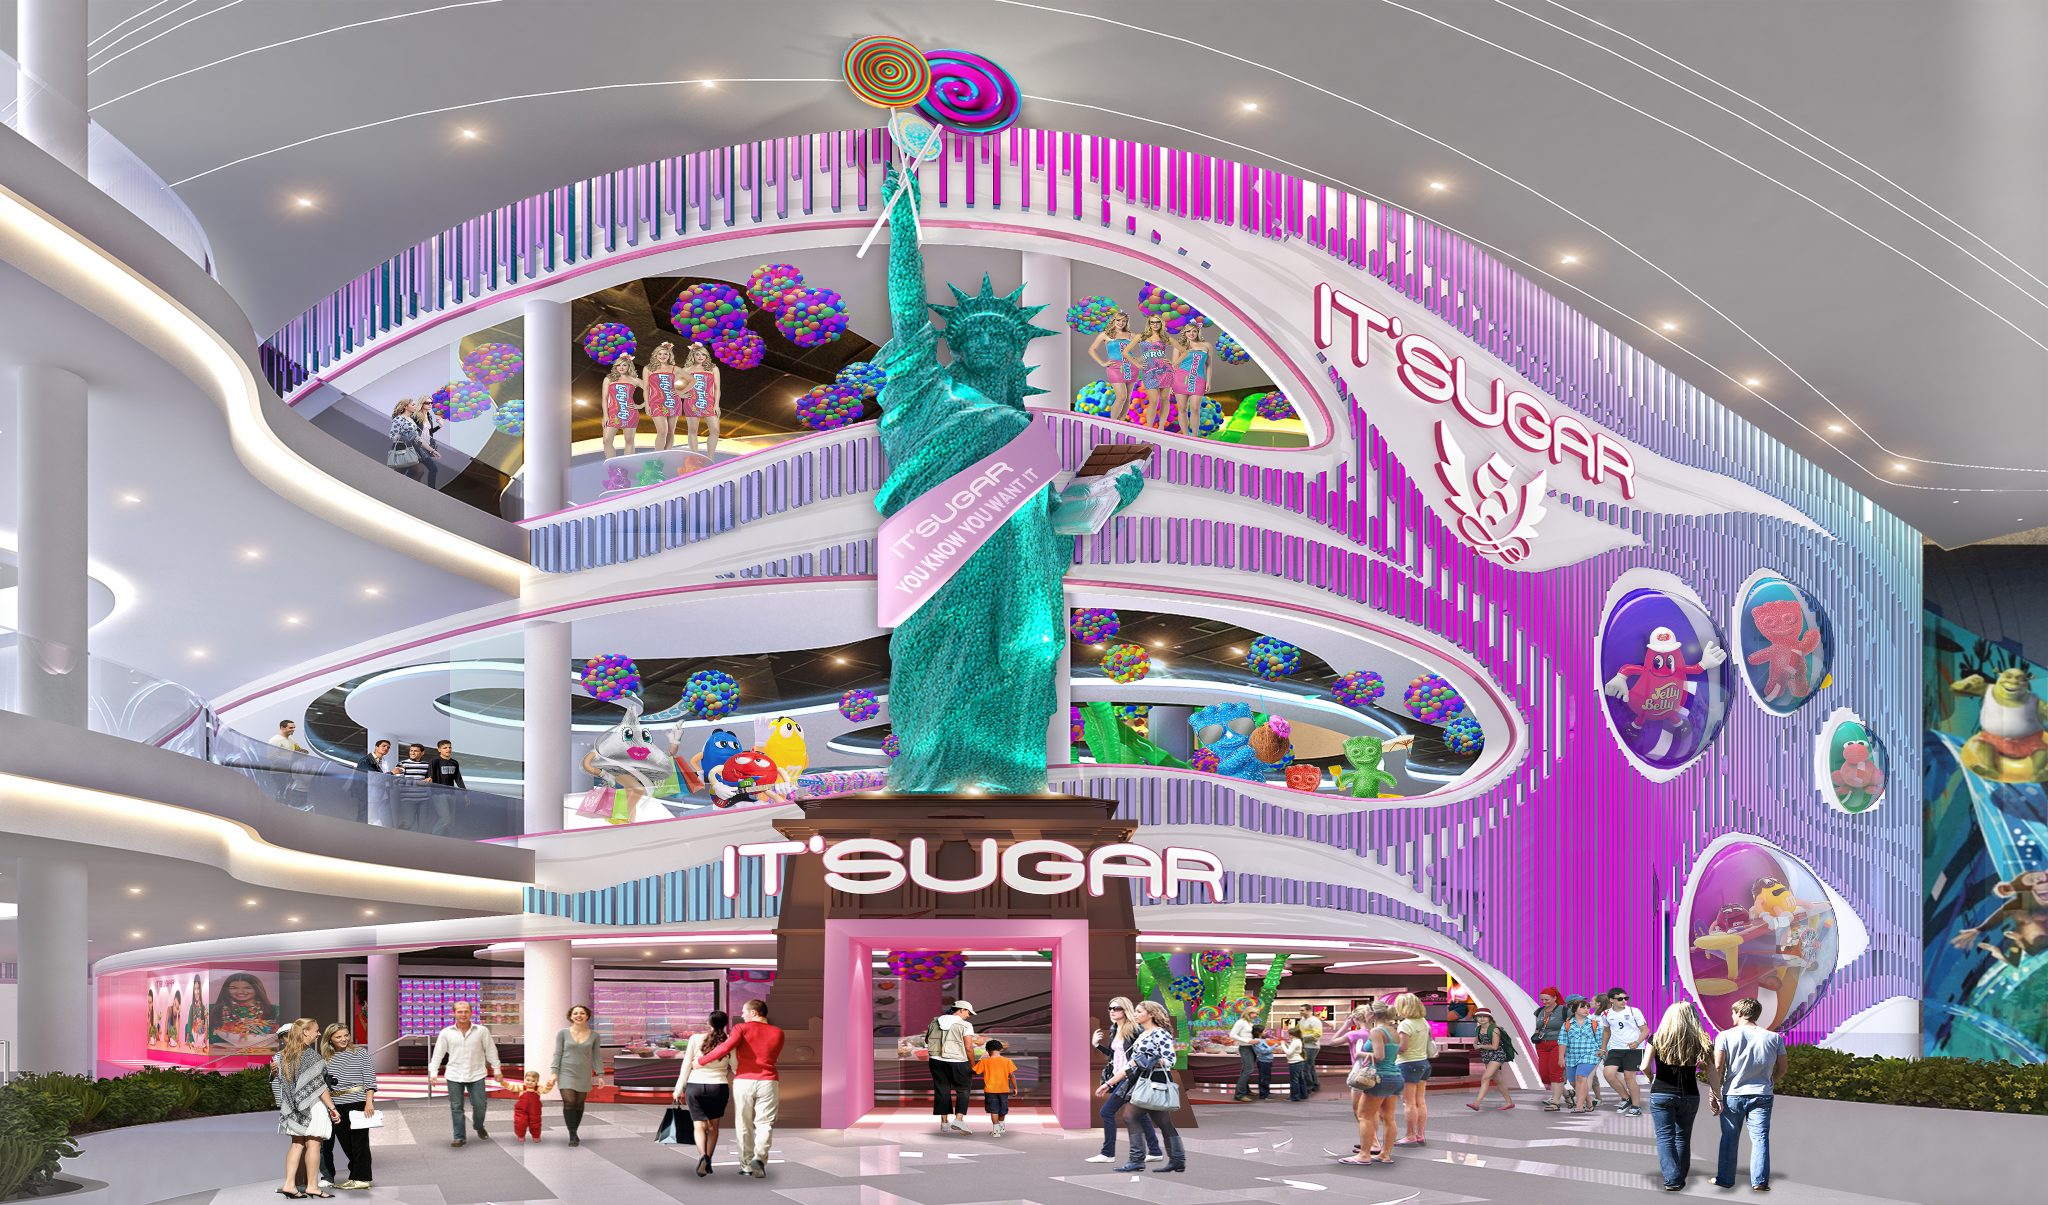 IT’SUGAR to Open World’s First Candy Department Store at American Dream image